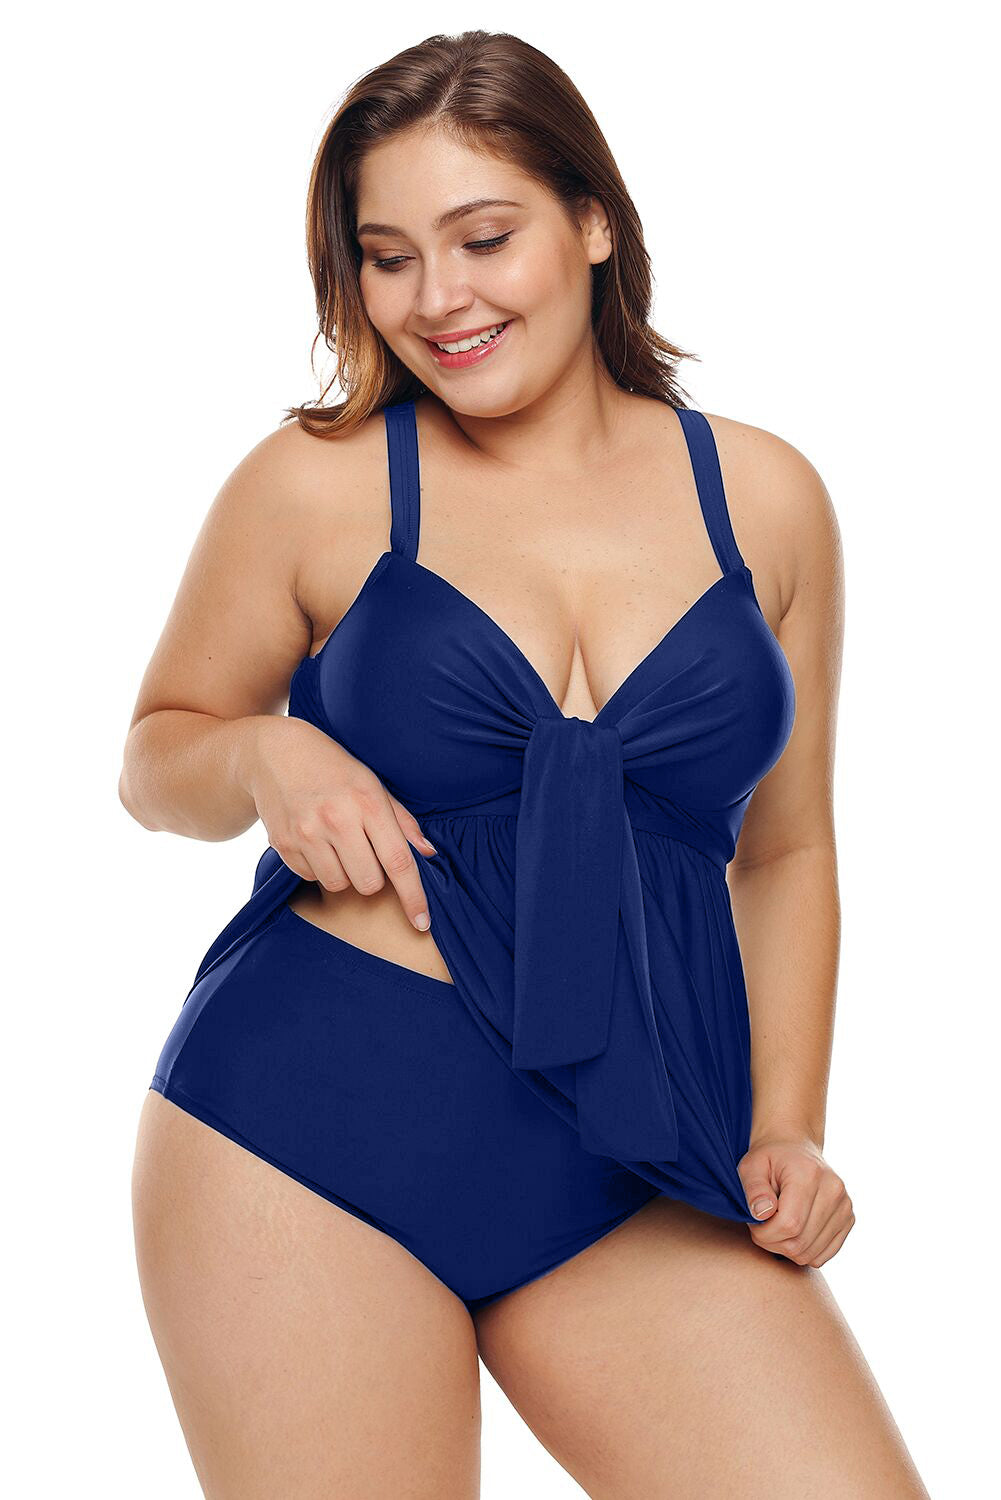 Plus Size Pleated Babydoll Top and High Waist Panty Swimsuit